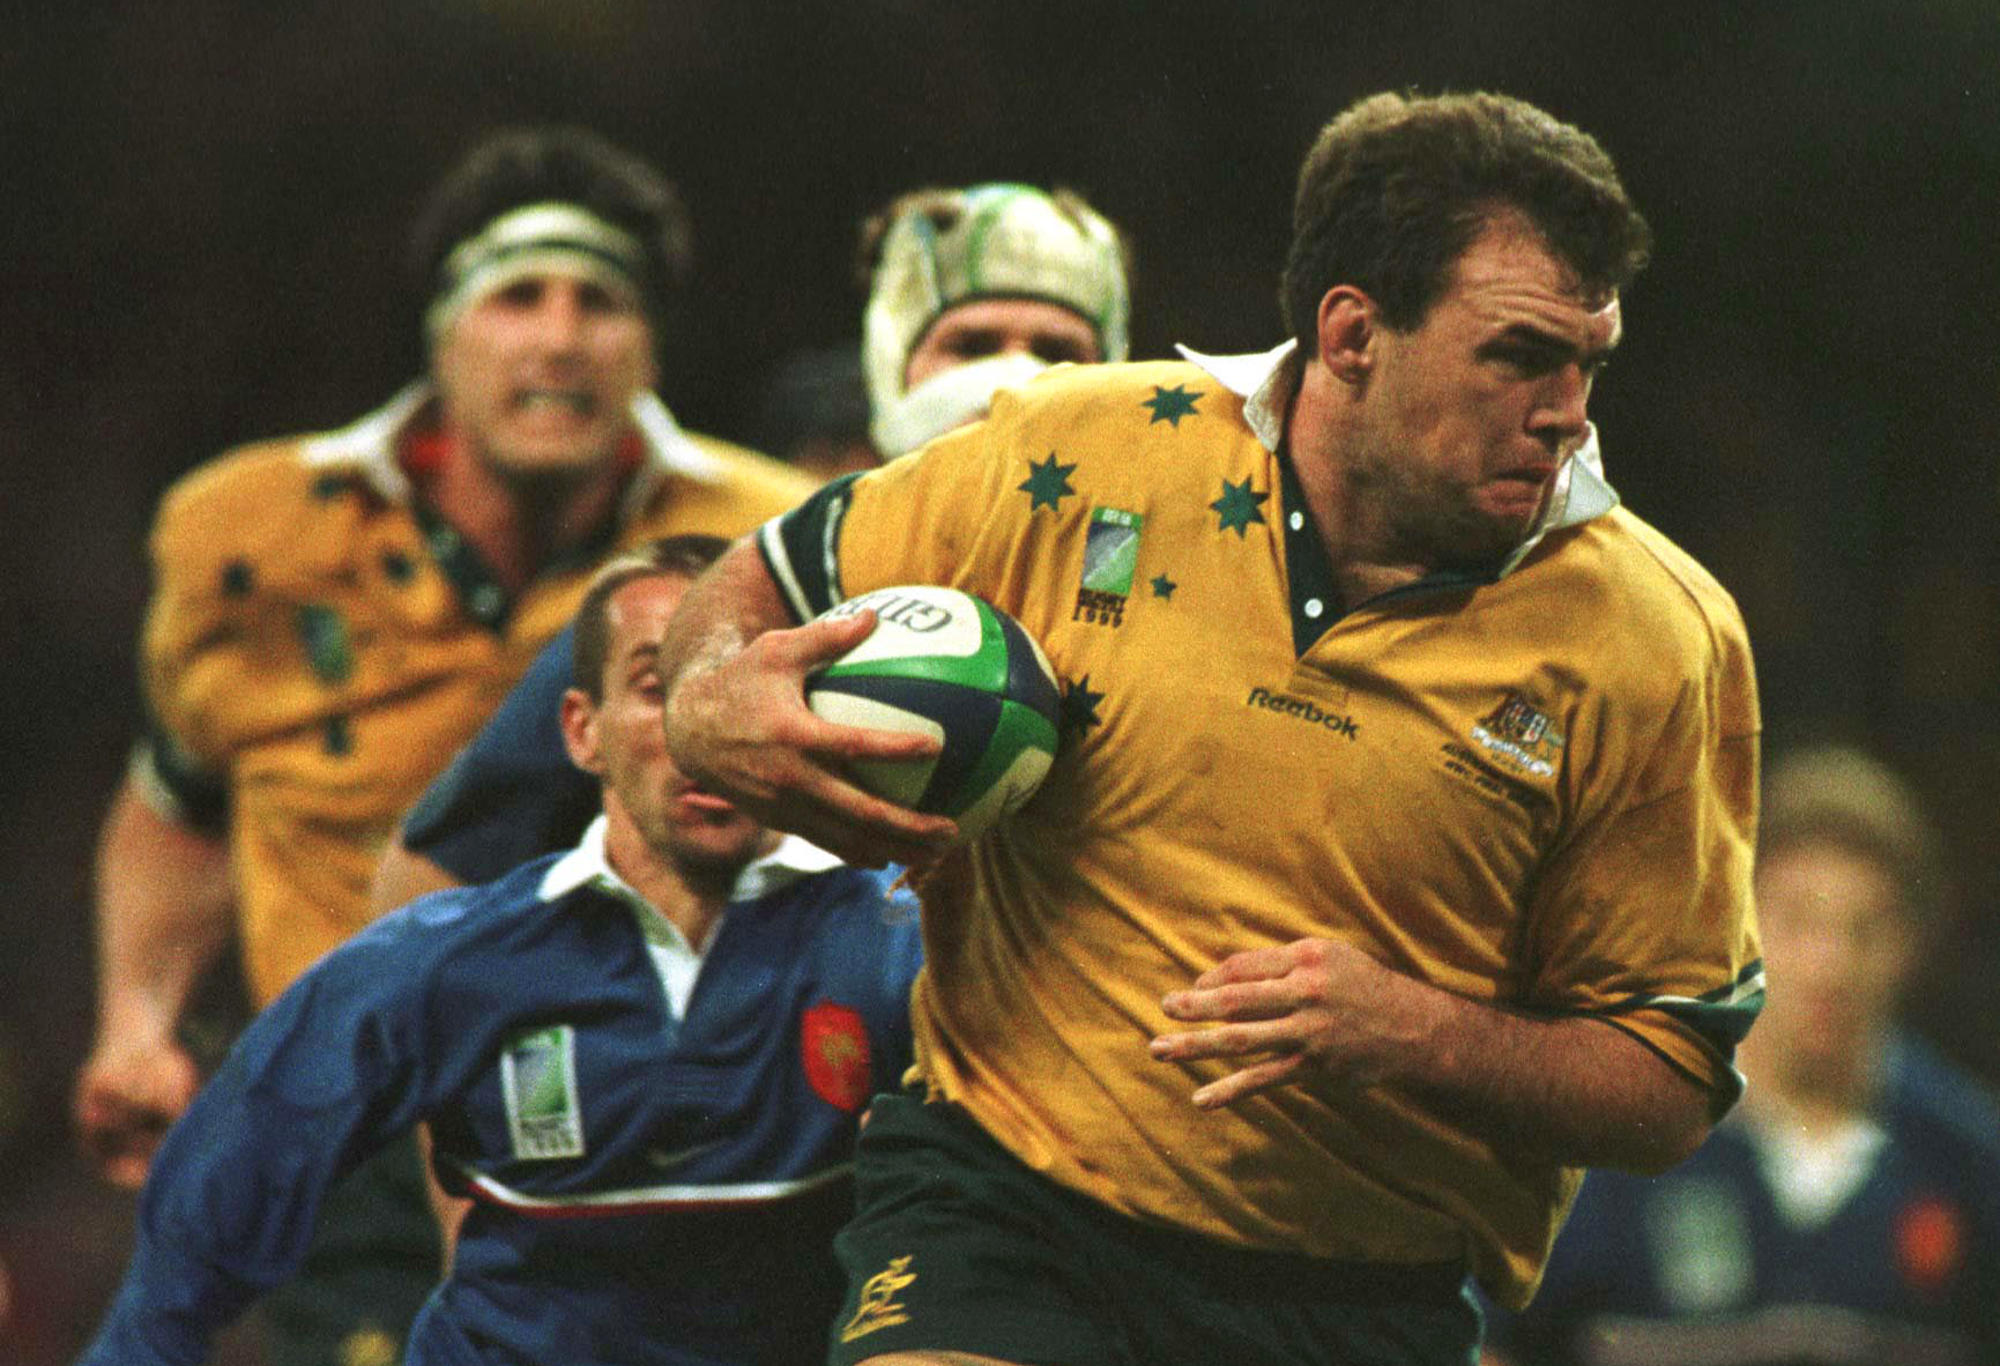 Owen Finegan scores a try during the 1999 World Cup final